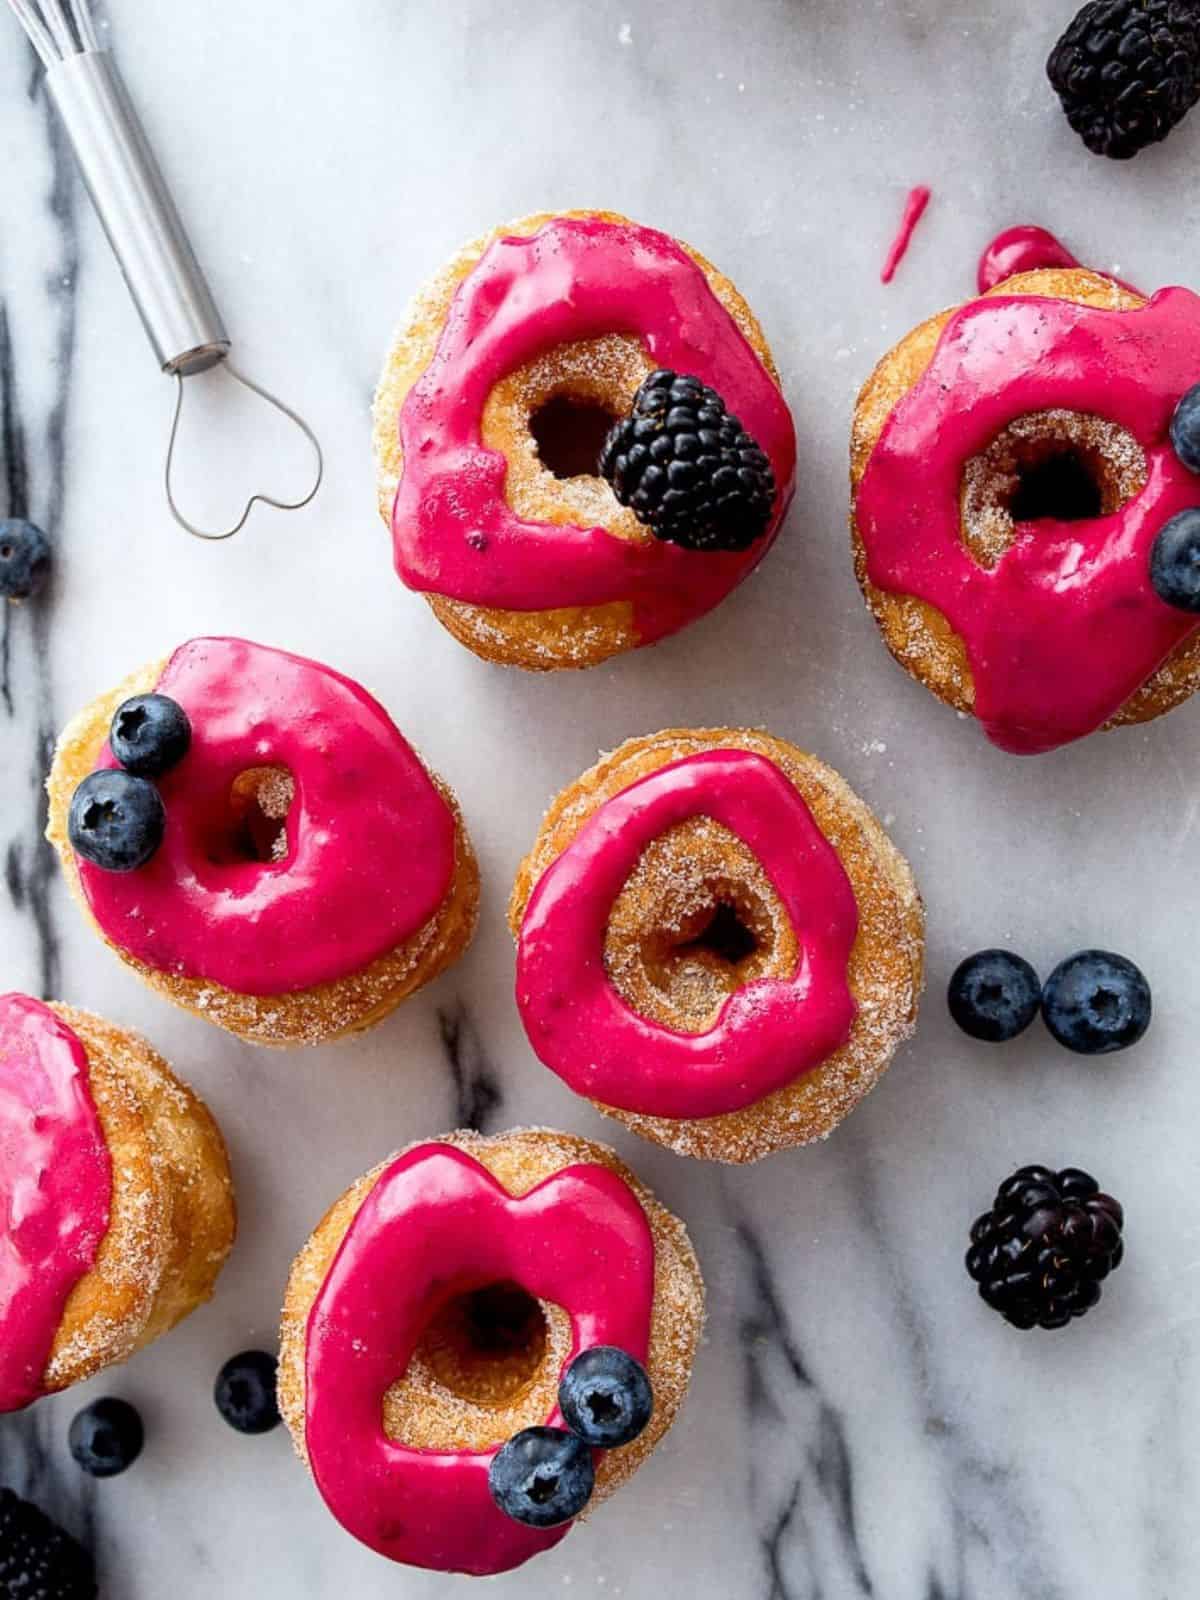 Hot pink donuts decorated with fresh berries on a marble board.